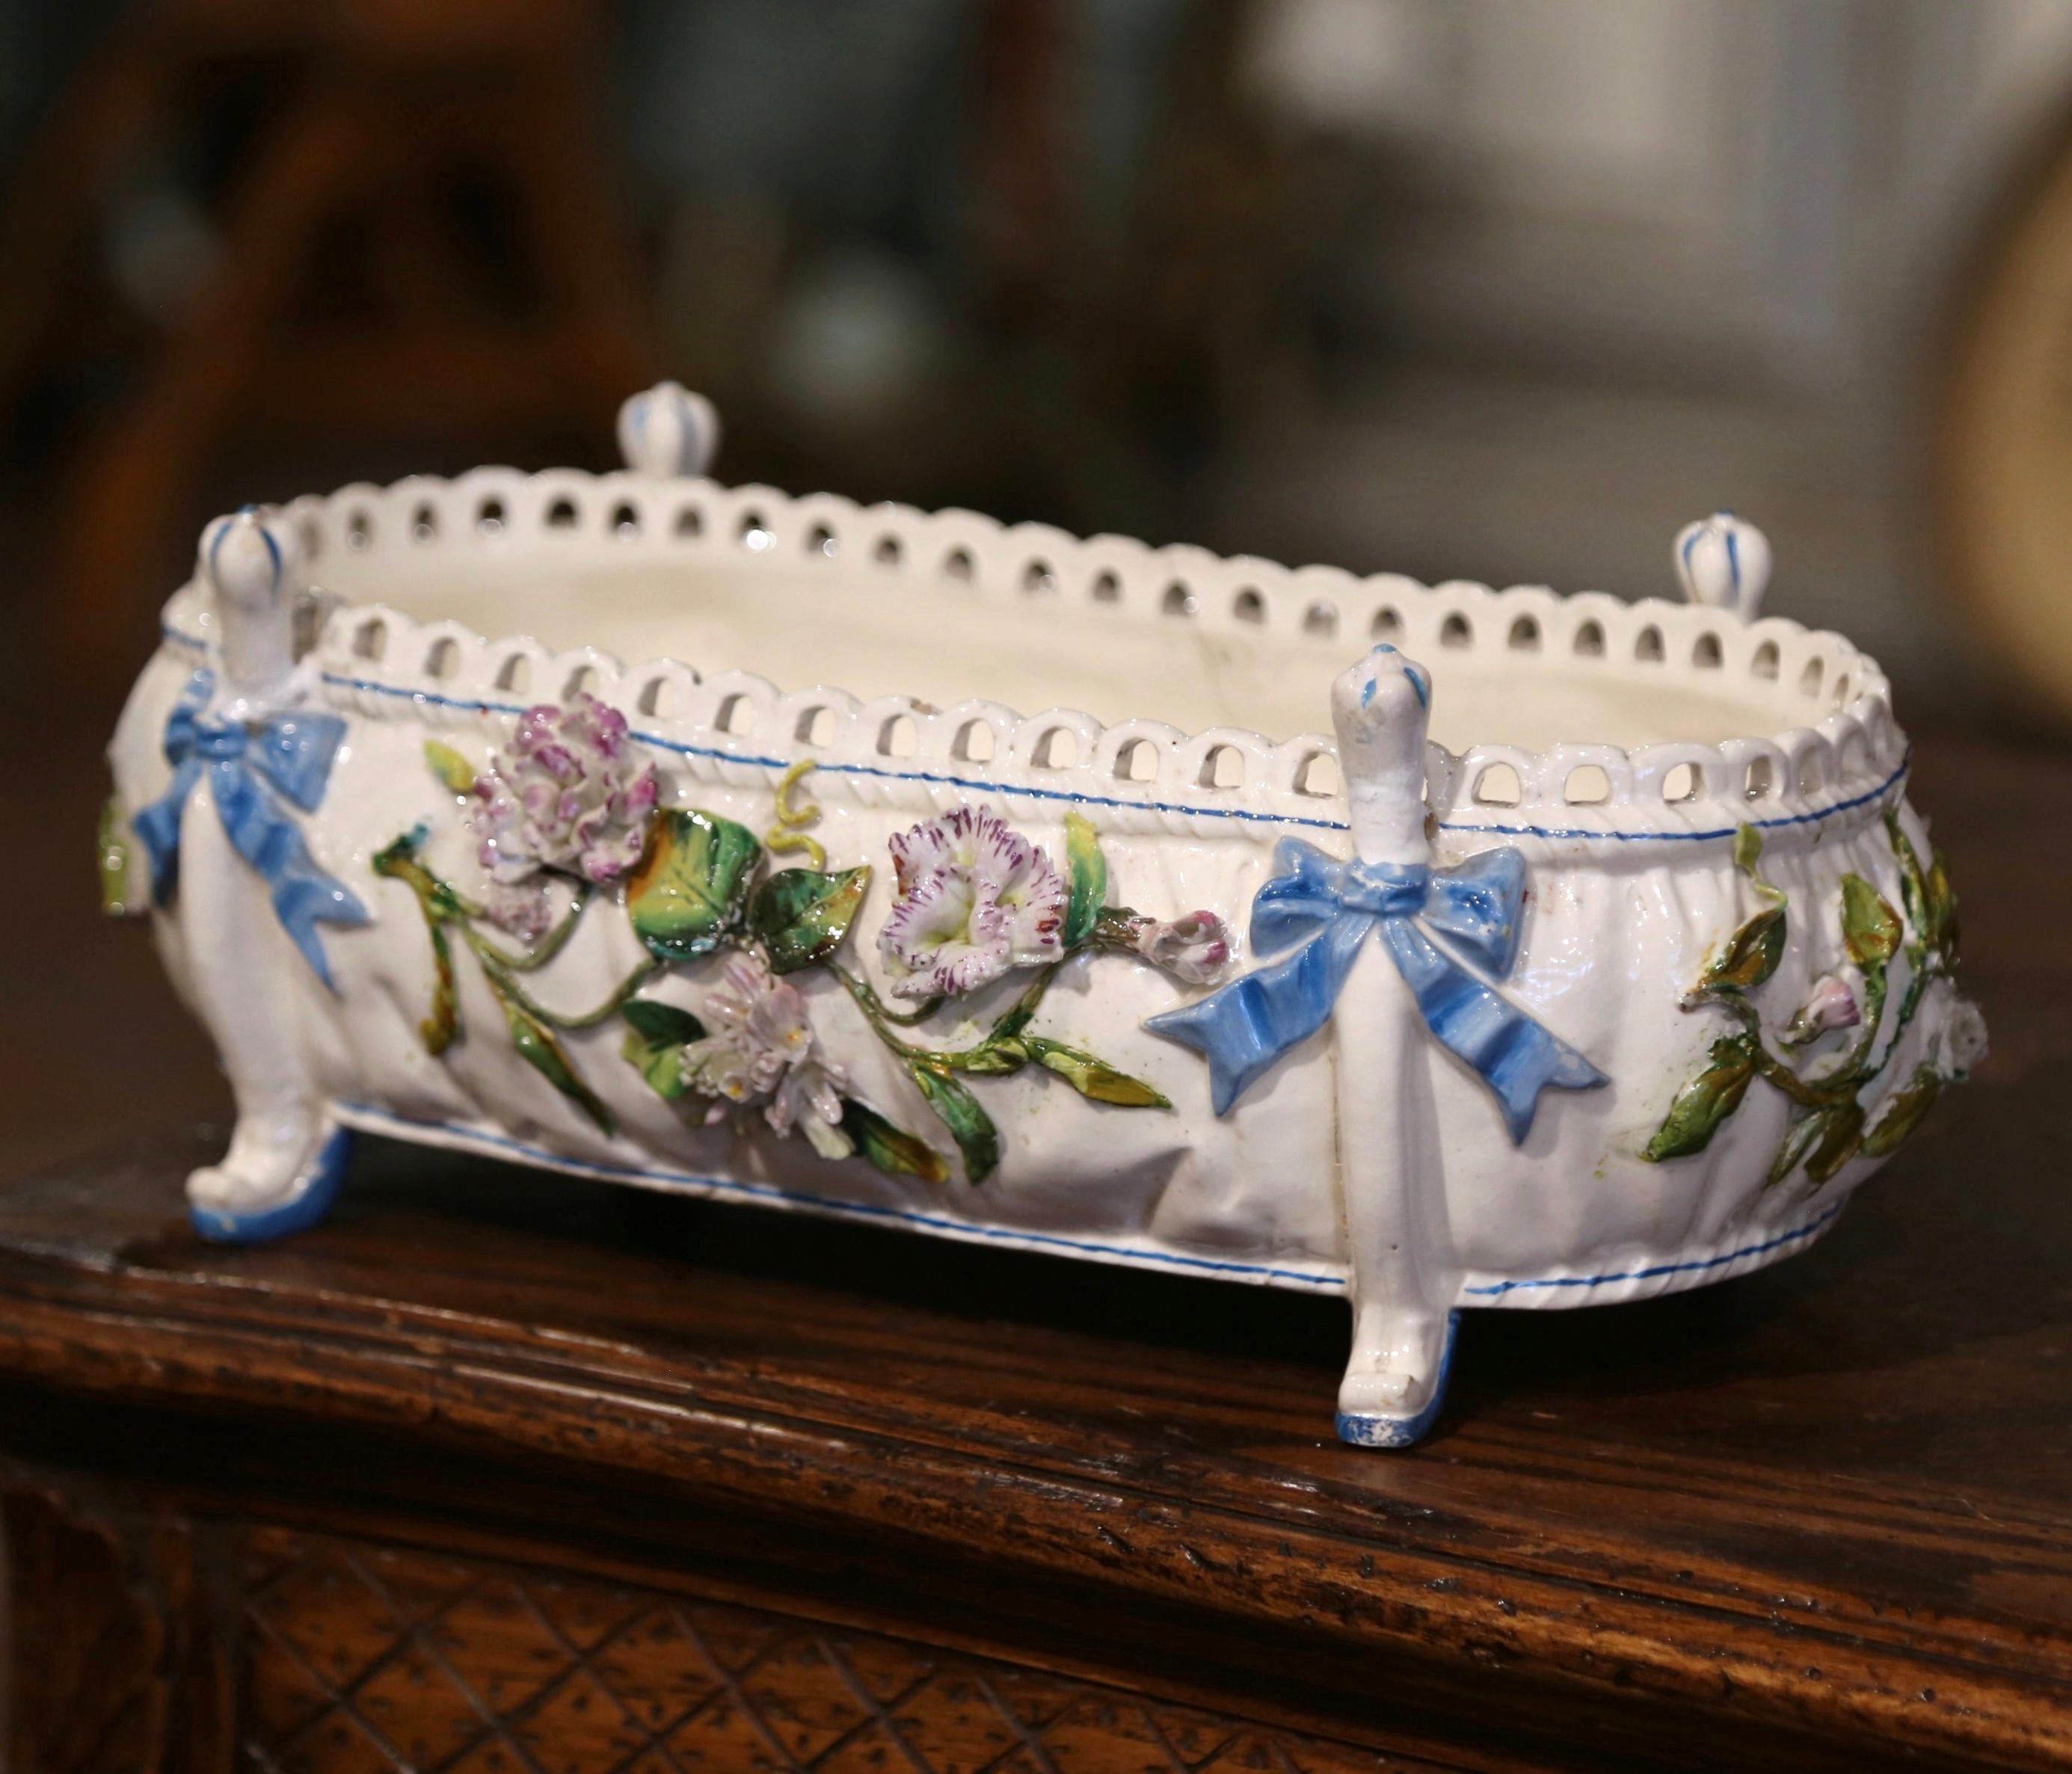 This beautiful and colorful Majolica cache pot was crafted in France, circa 1880. A Classic example of French barbotine artistry, the sculptural porcelain piece is oval in shape with bombe sides. Standing on scroll feet decorated with a ribbon bow